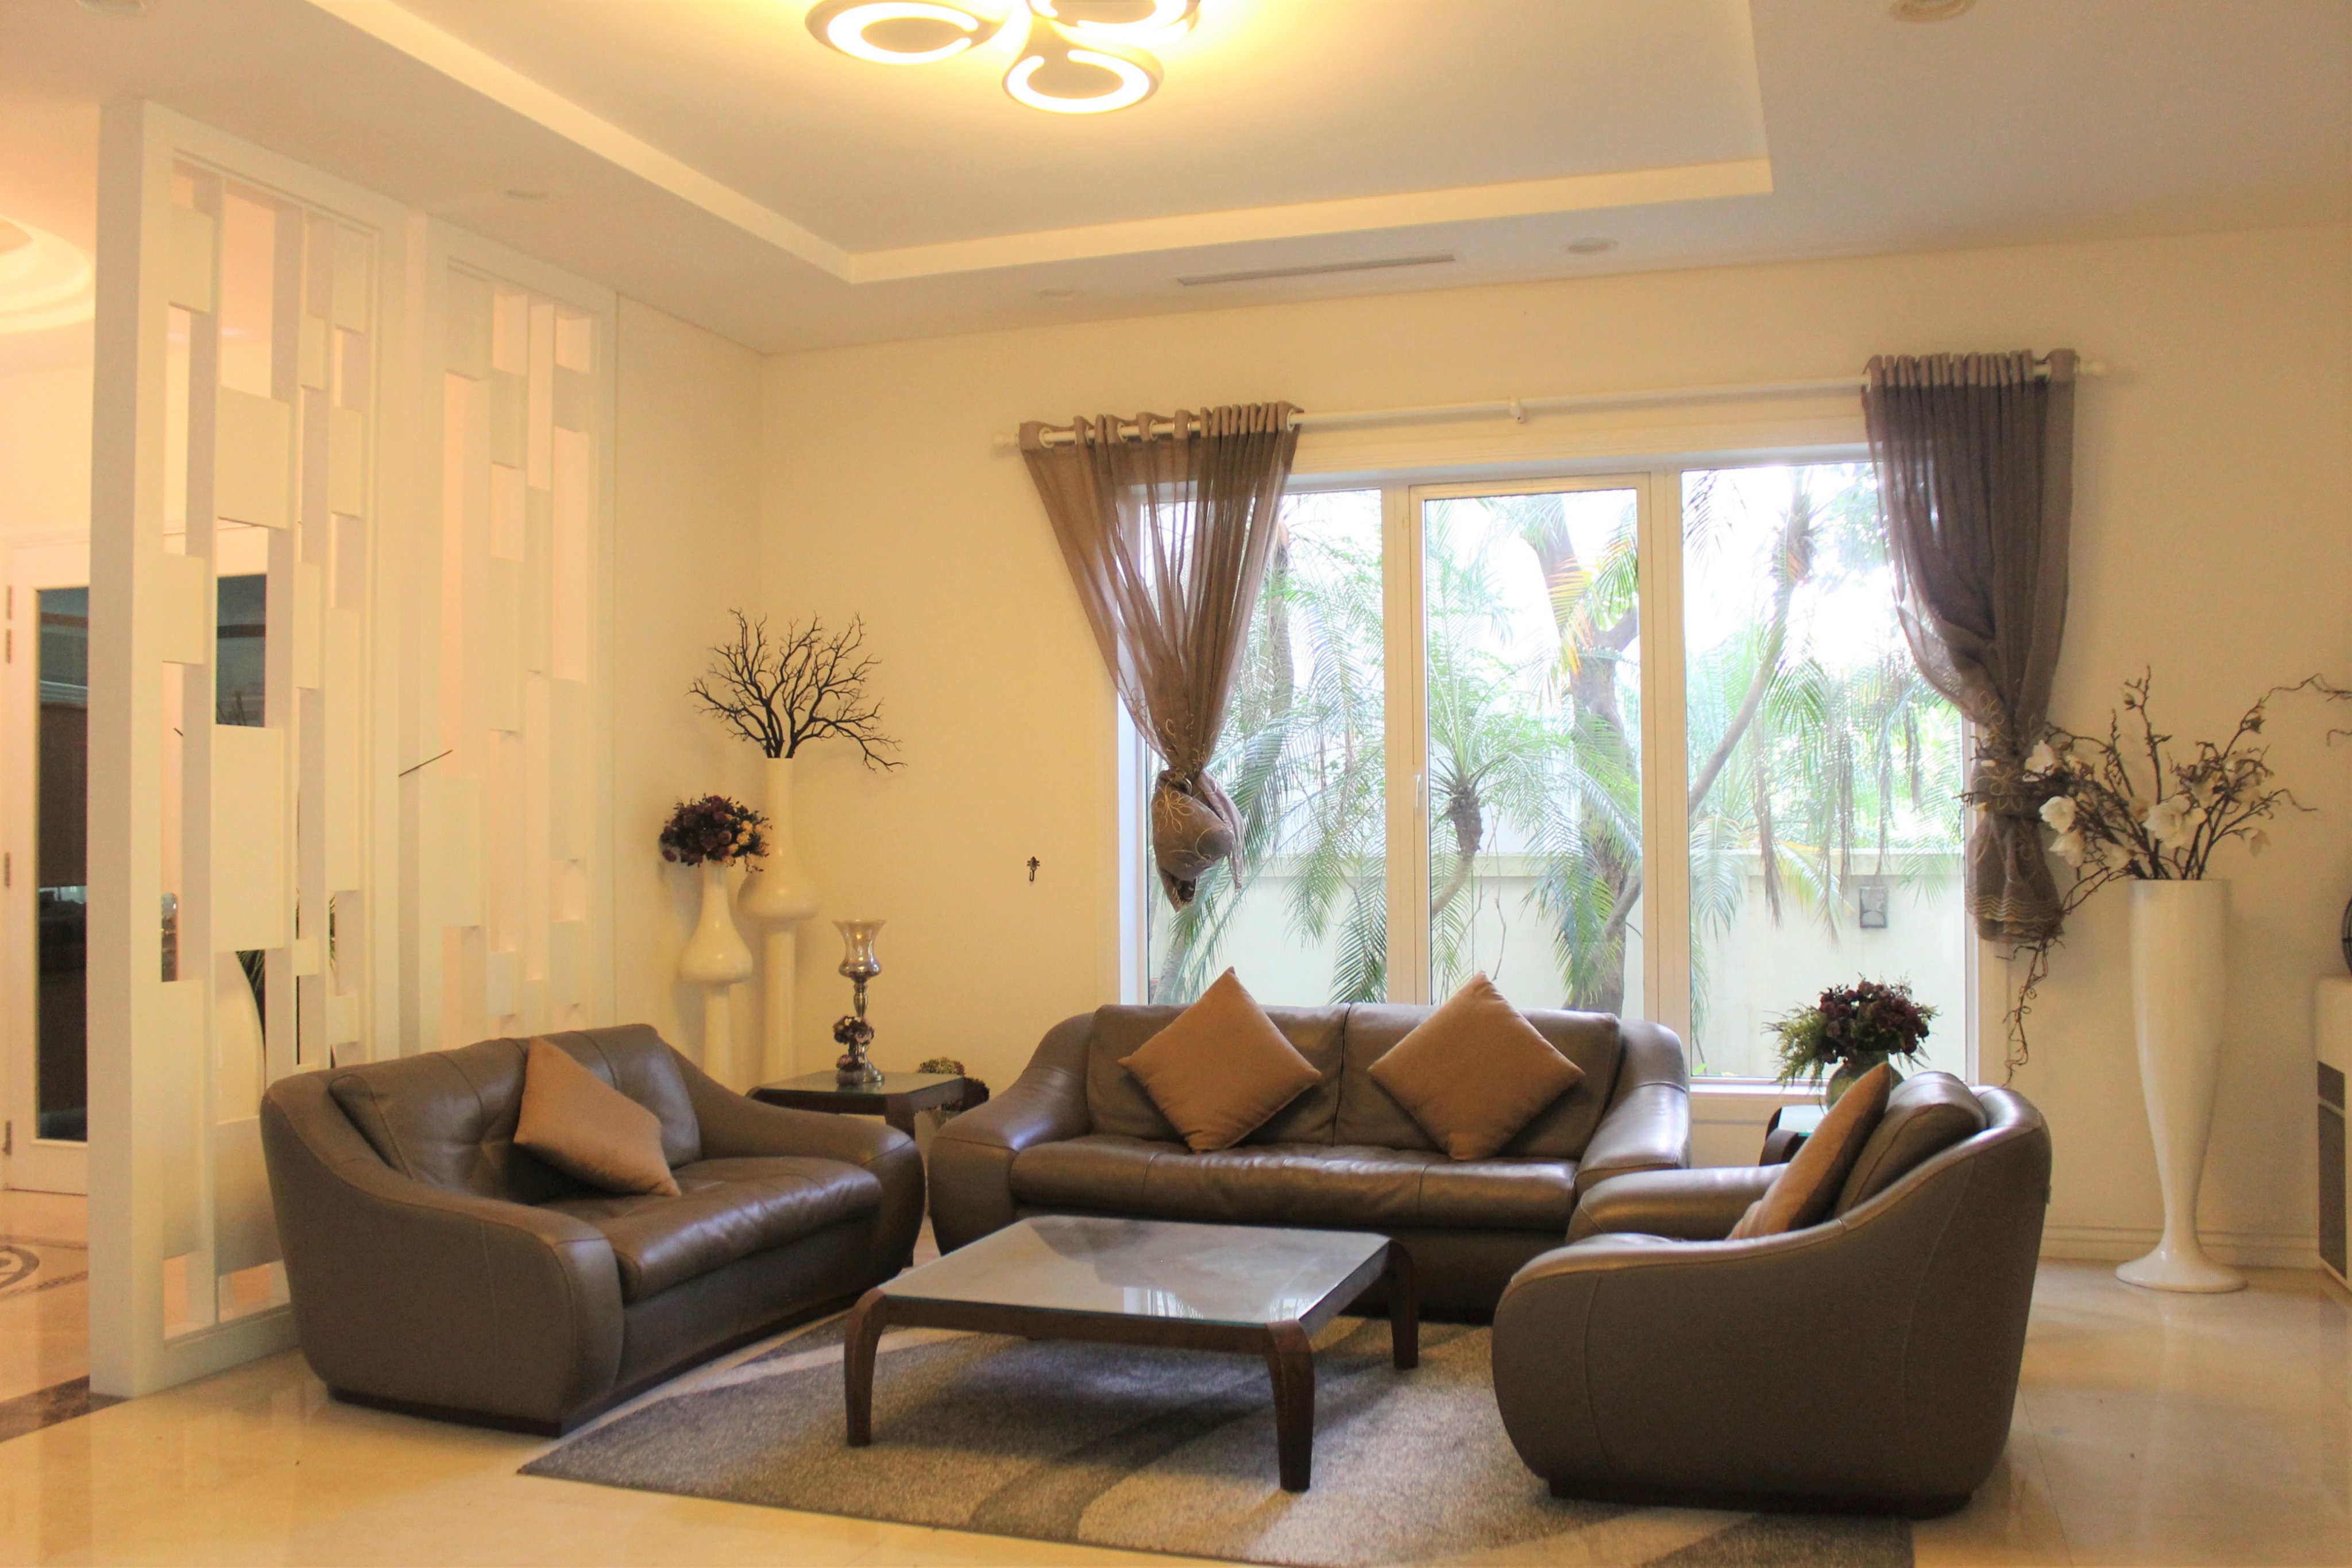 A Detached Villa for rent with full furnishings in Vinhomes Riverside